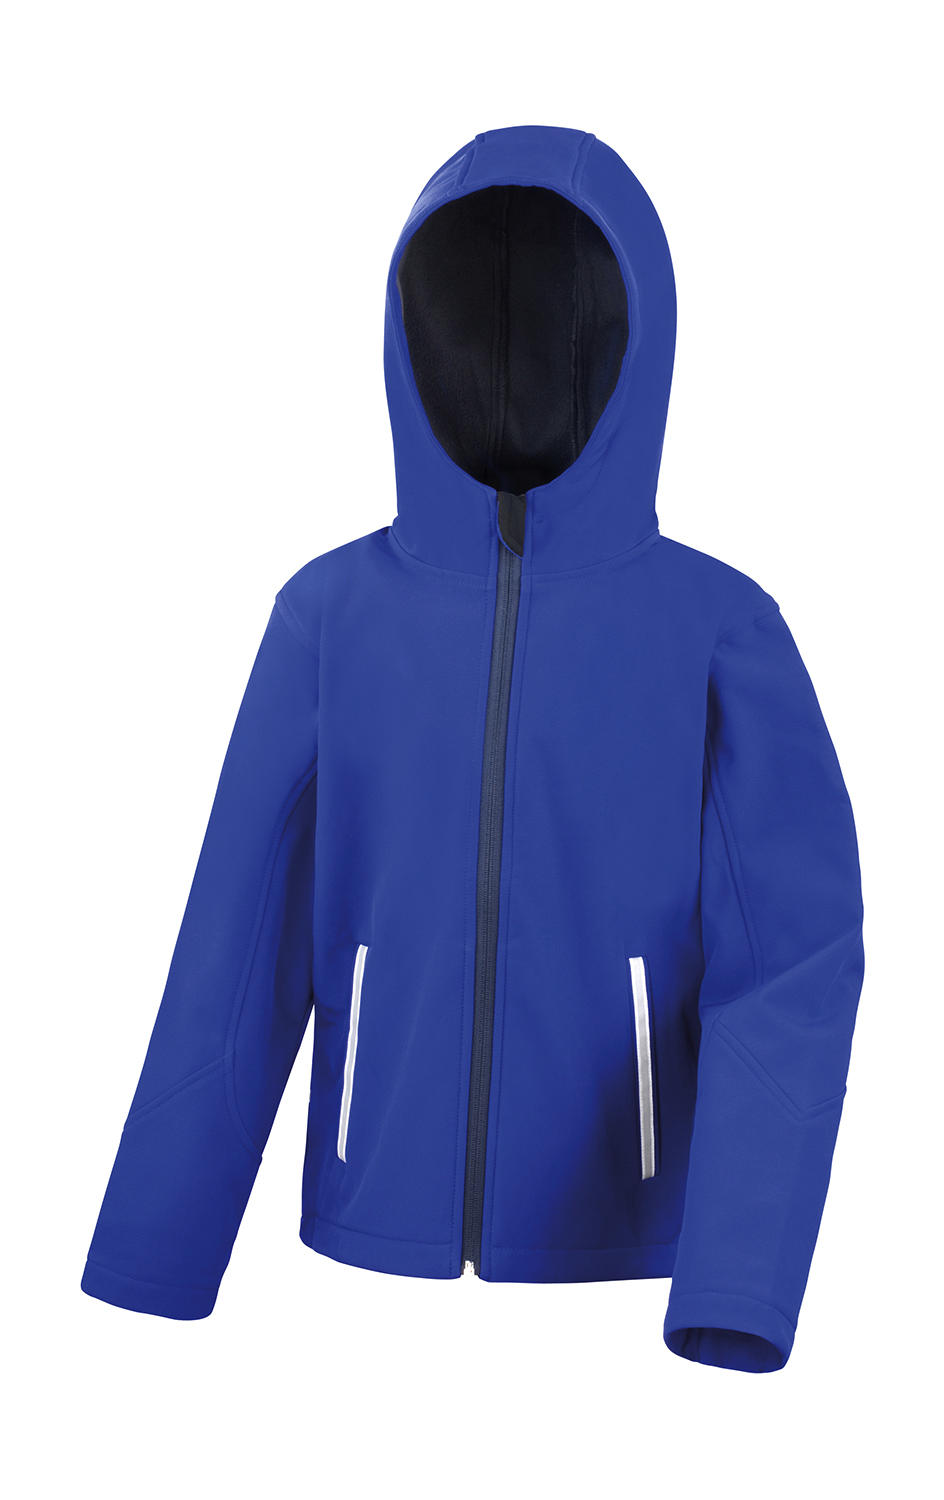  Kids TX Performance Hooded Softshell Jacket in Farbe Royal/Navy